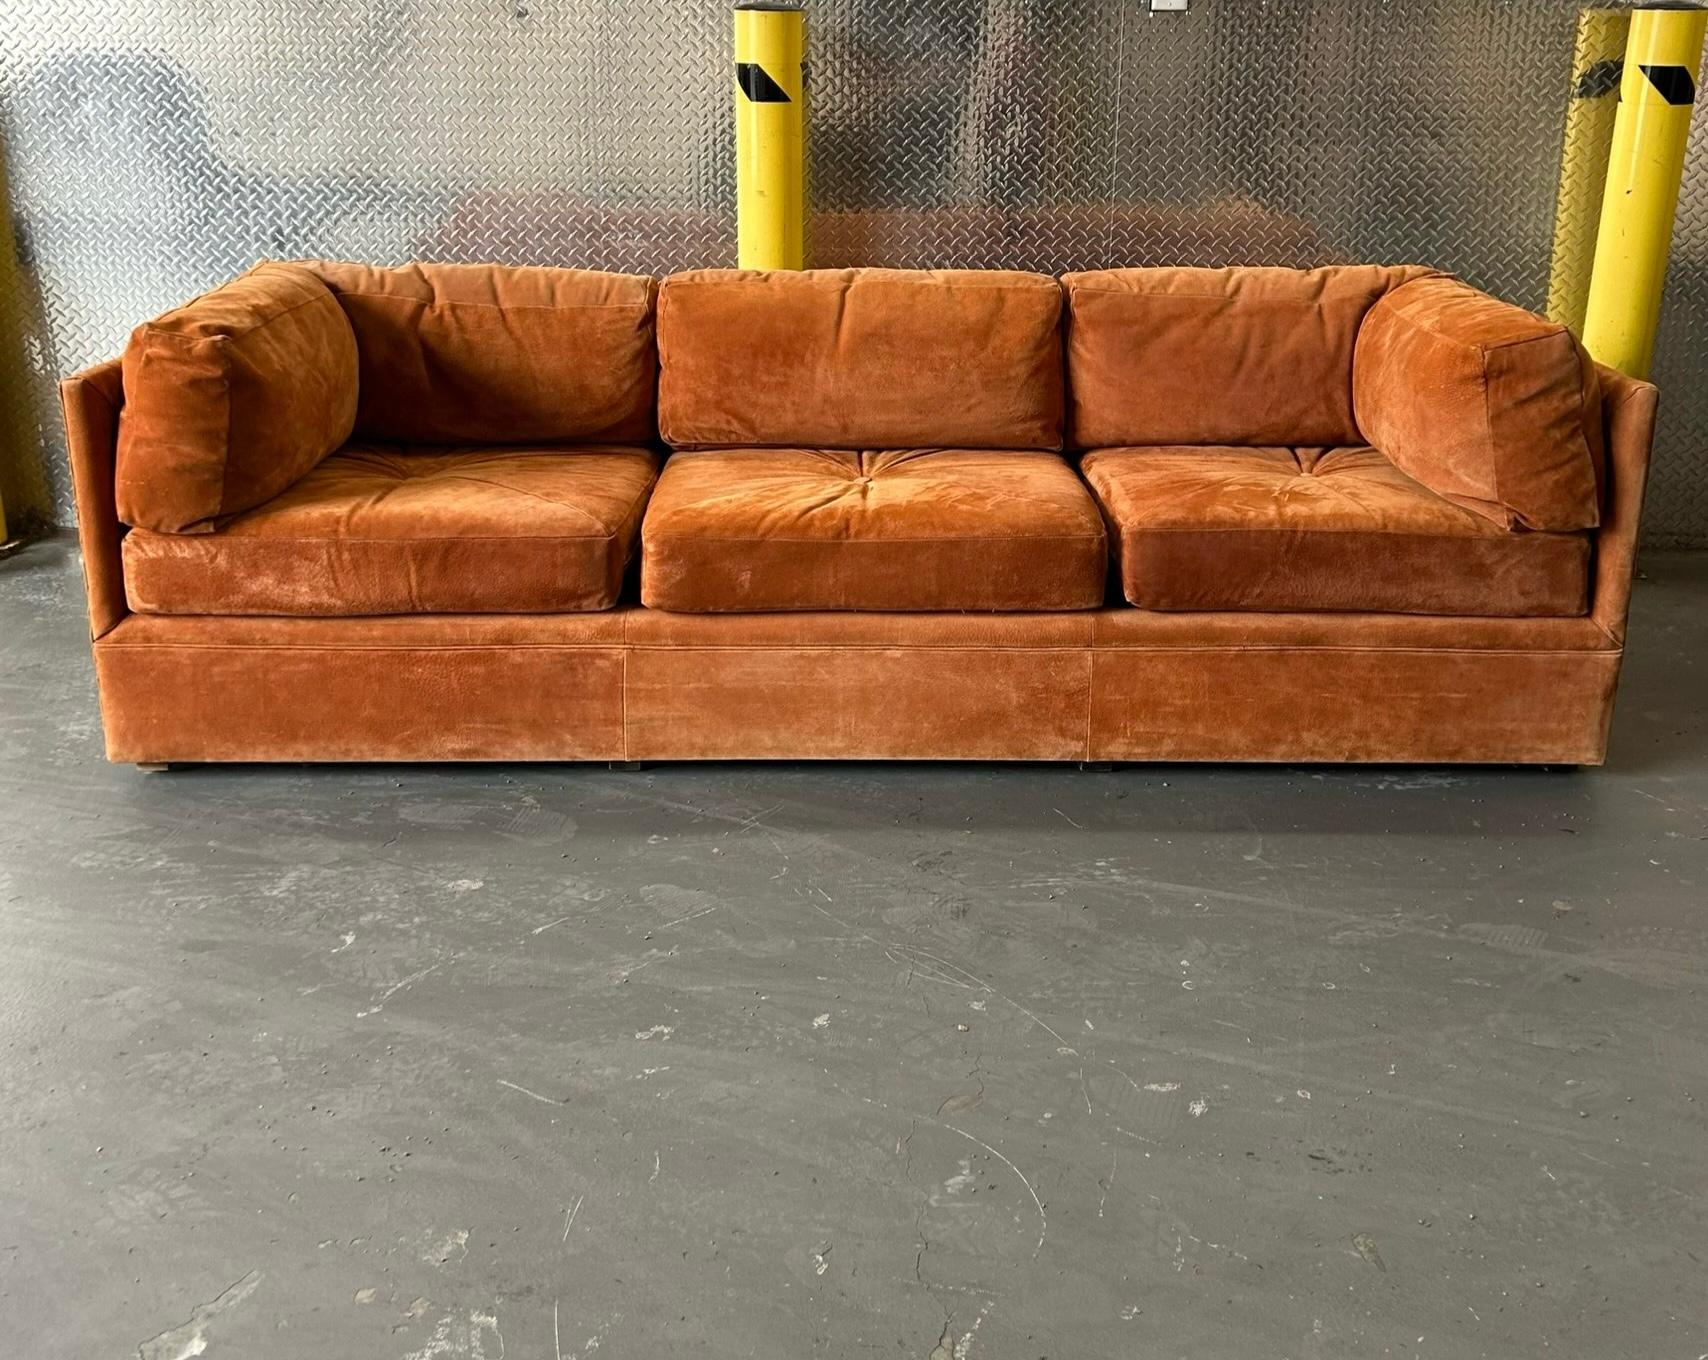 Vintage suede leather 3 seat sofa by Schaffer Bros. Great condition. Small marks on suede throughout

